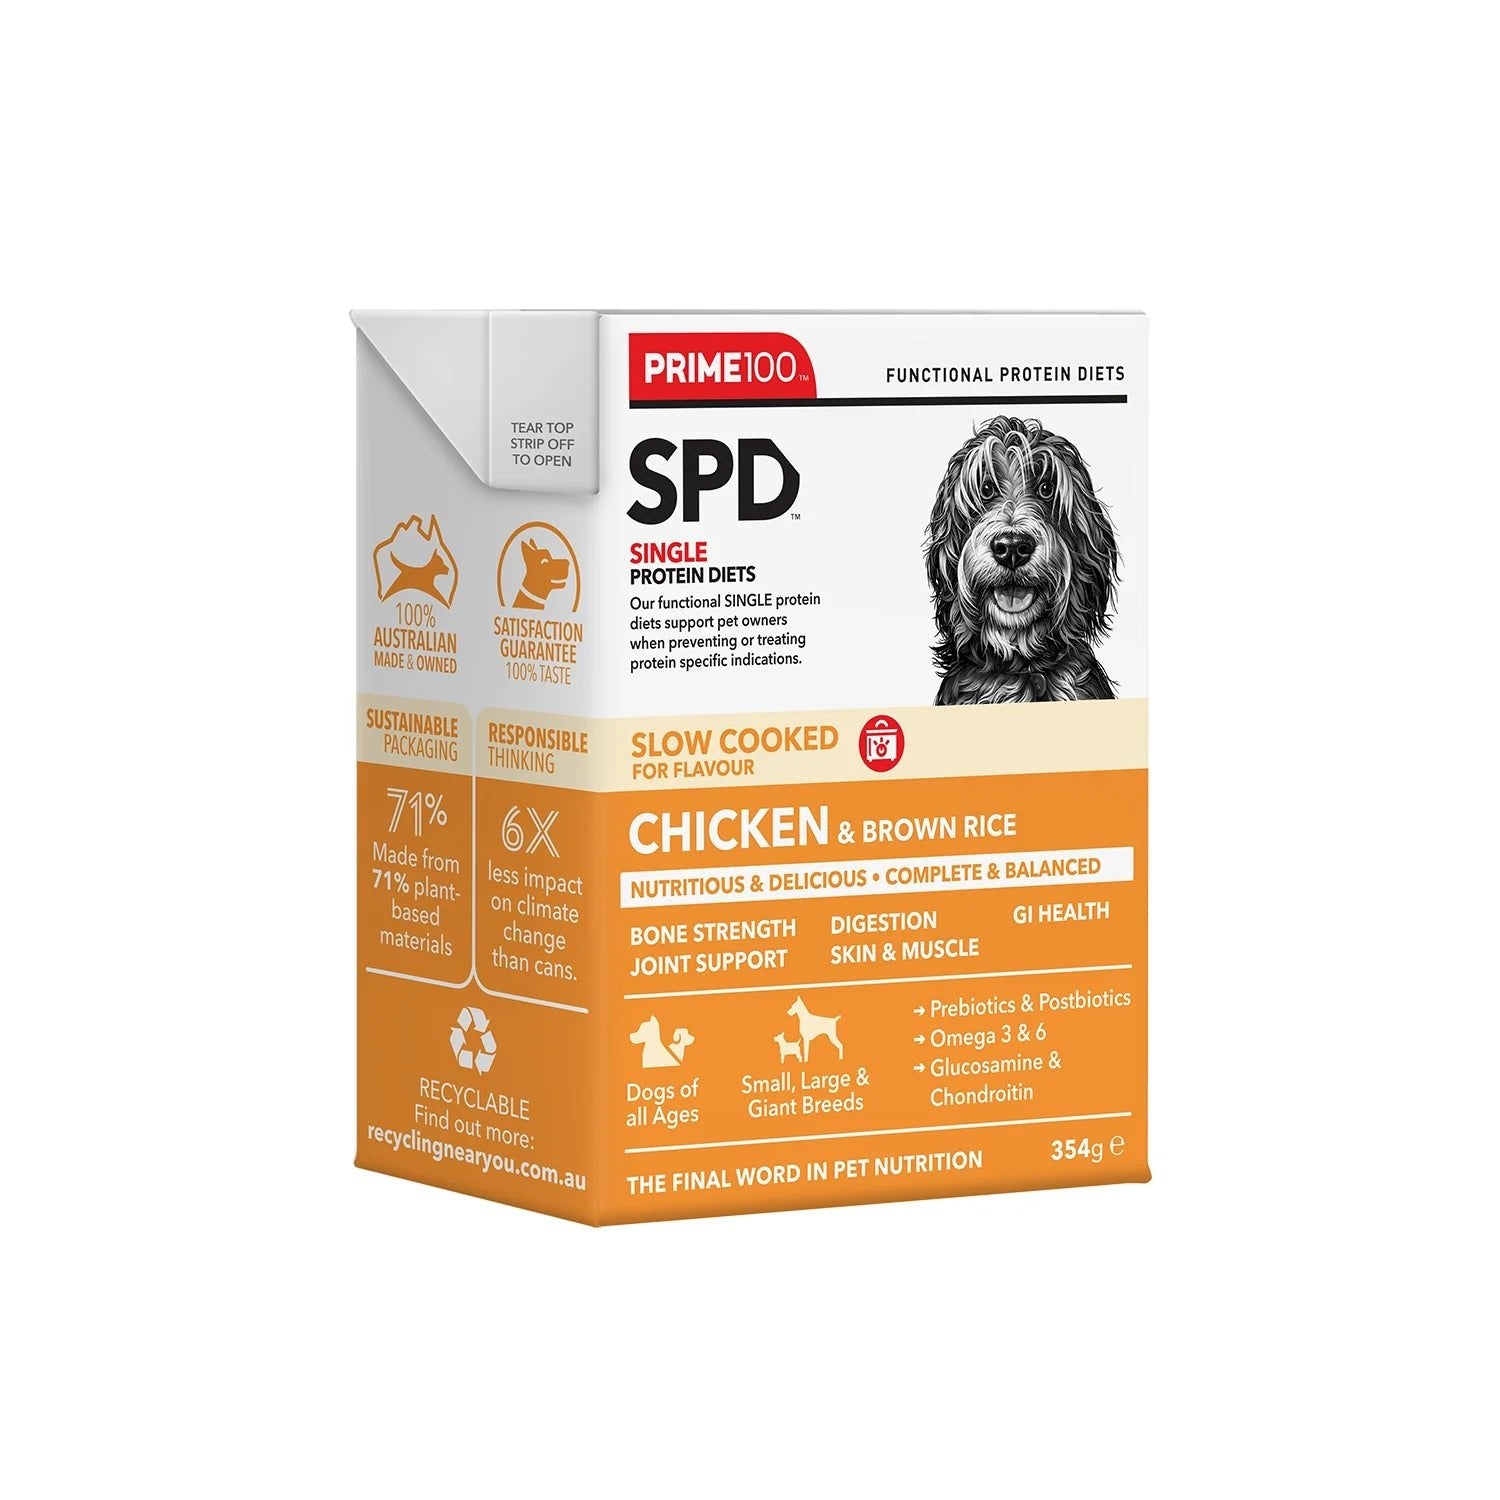 Prime 100 SPD Slow Cooked Chicken and Brown Rice 354g - Woonona Petfood & Produce